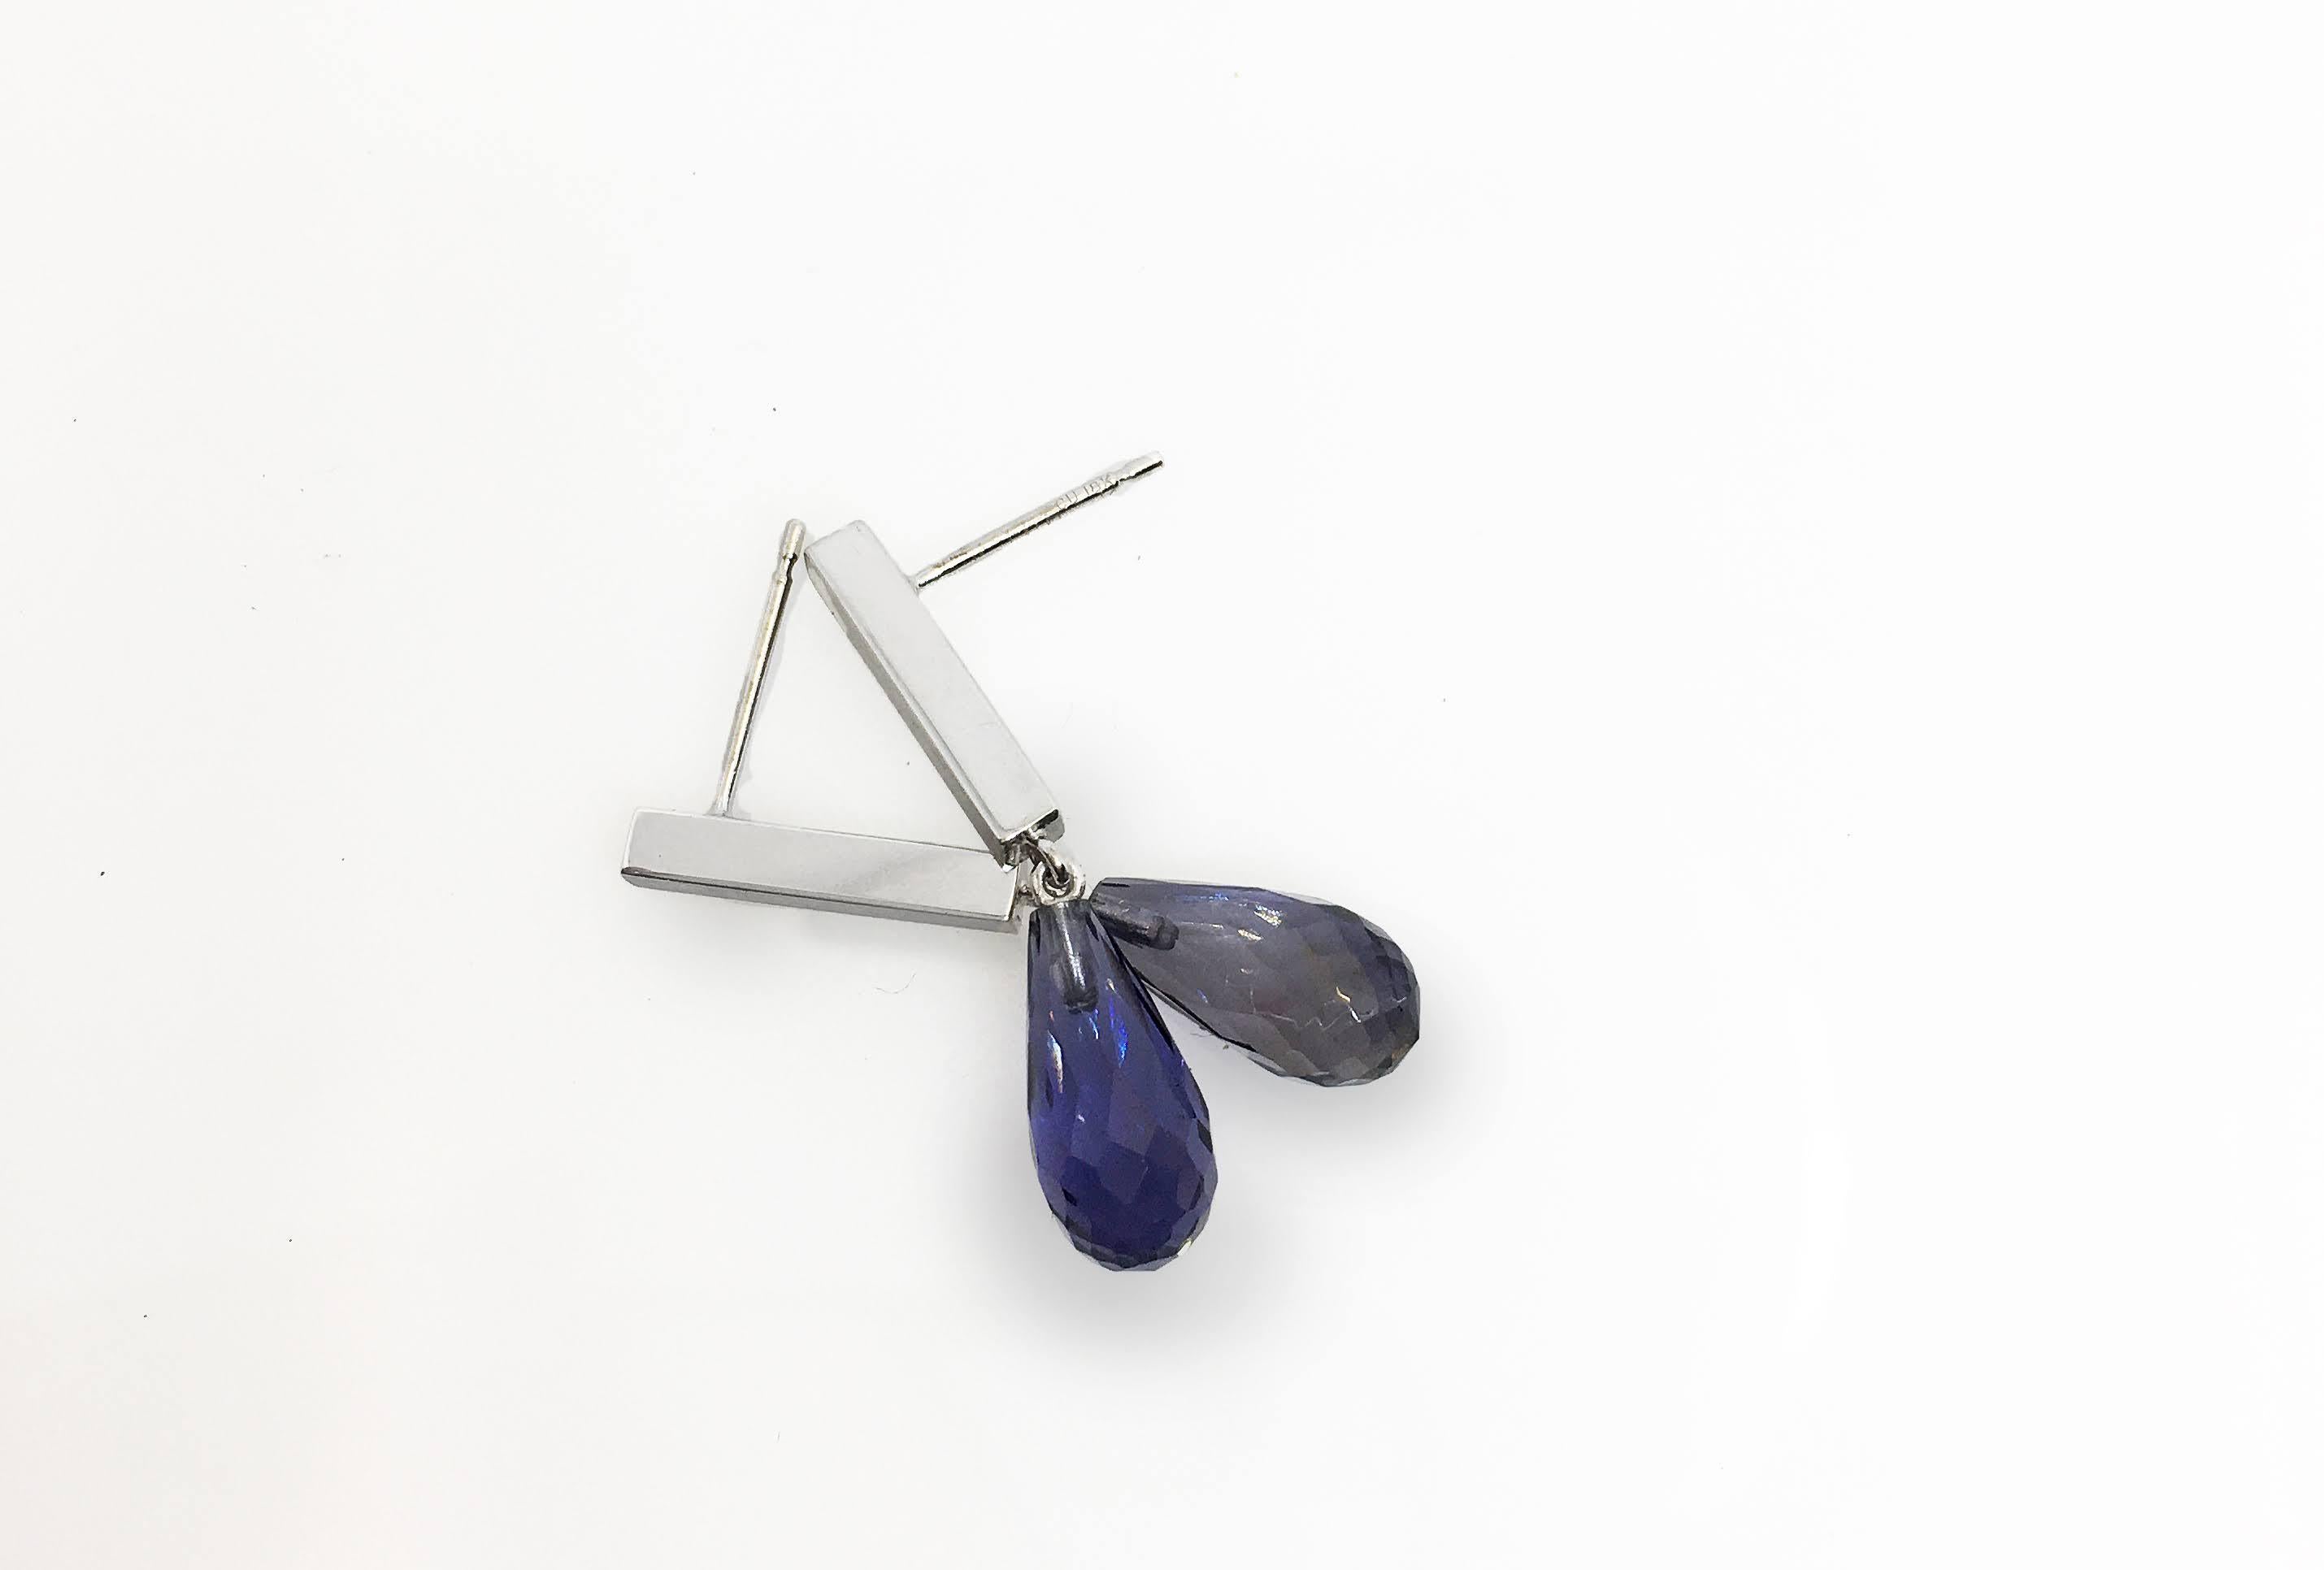 Iolite briolette cut tear-shaped drops hang from a white gold bar for a suave contemporary air. Now aren’t these tears you’d love to have? Tears of joy! Iolite can be light to deep blue, and usually has a purplish tinge. Deeper colored stones are